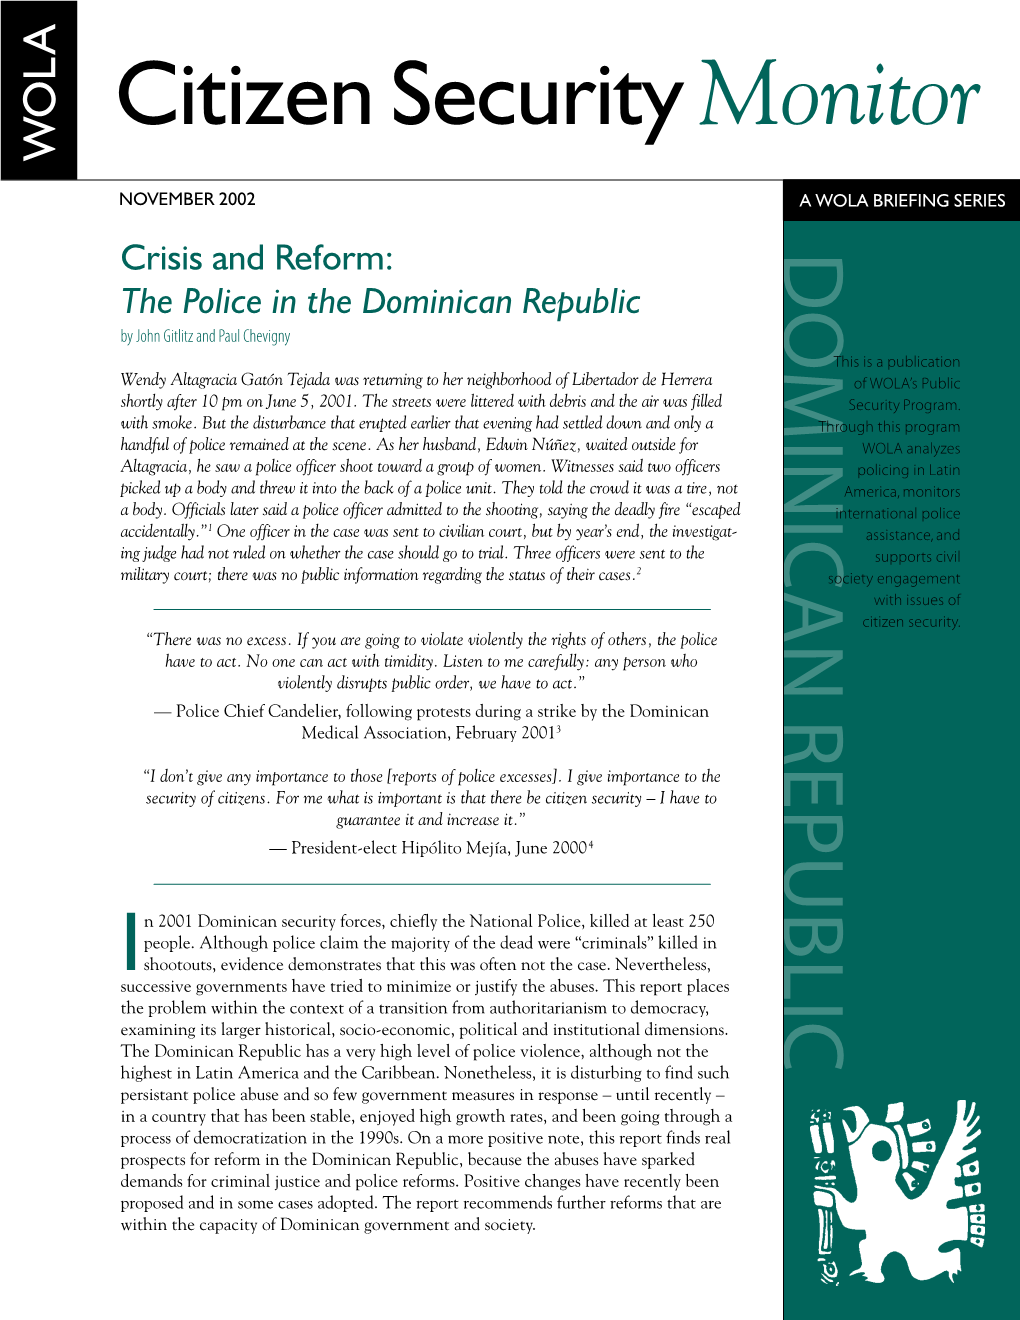 The Police in the Dominican Republic by John Gitlitz and Paul Chevigny This Is a Publication